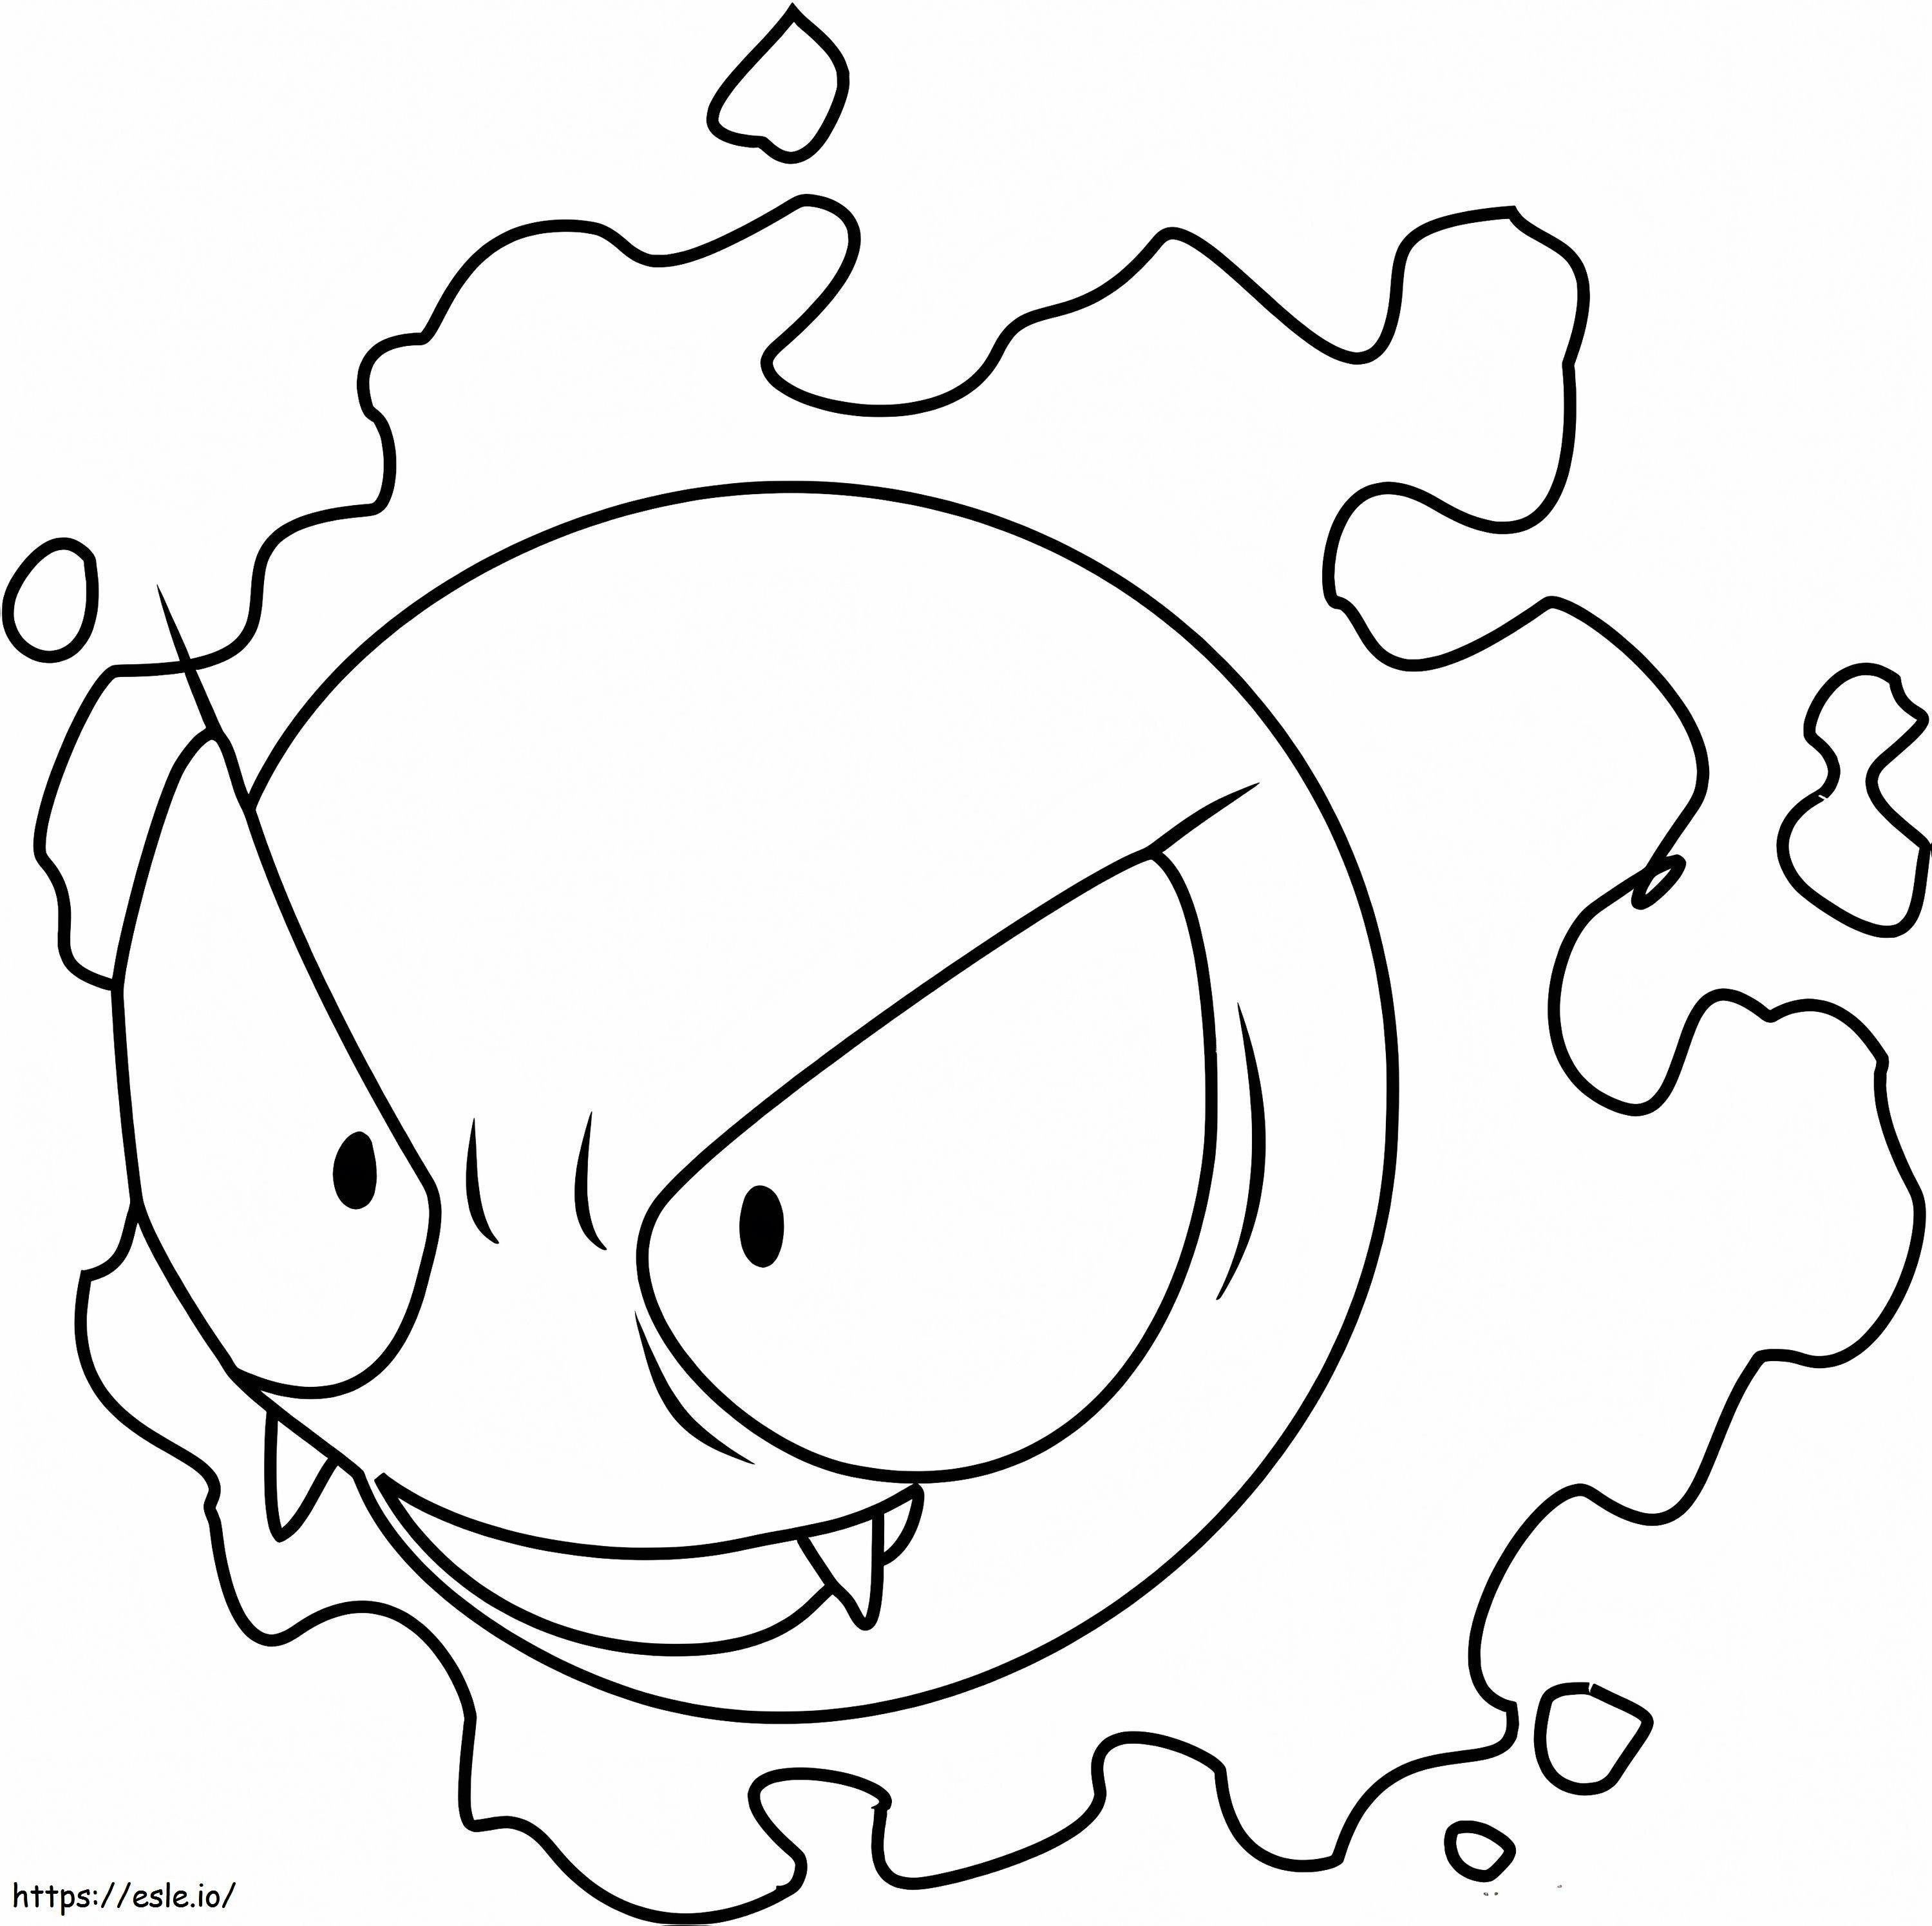 Gastly 2 coloring page